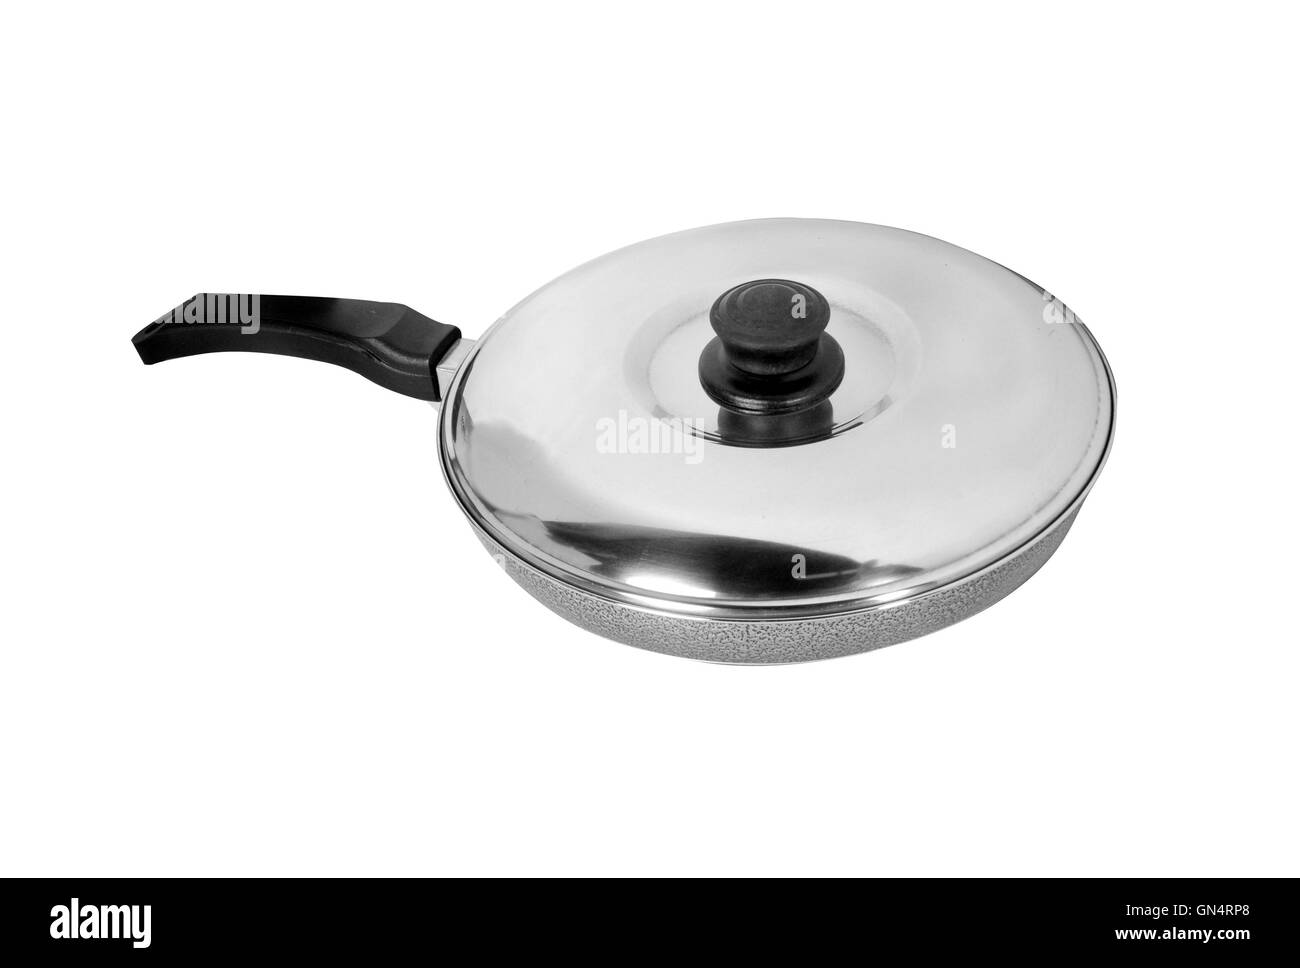 Big cooking pot Black and White Stock Photos & Images - Alamy